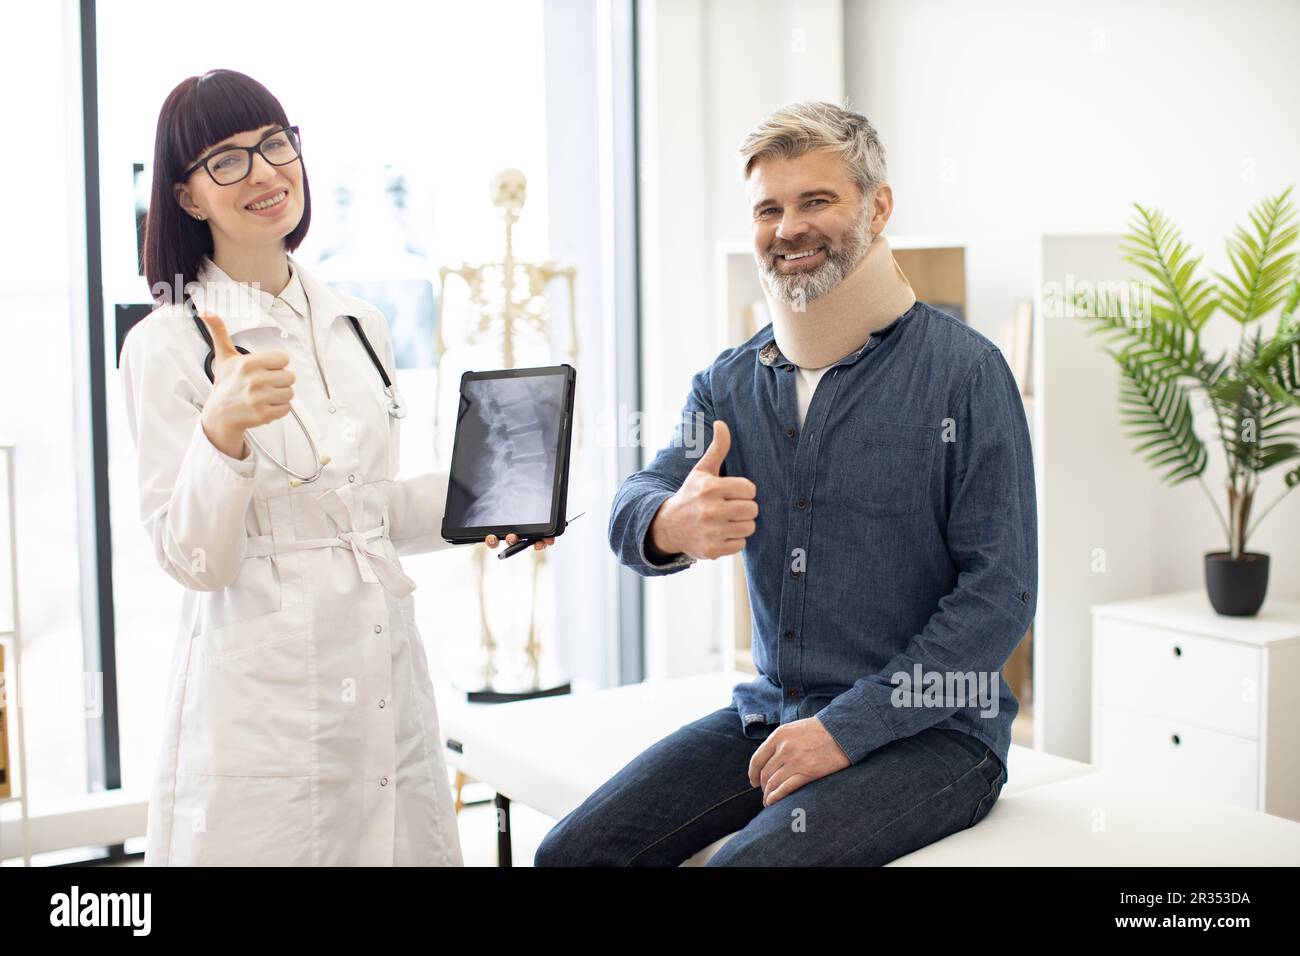 Cheerful young woman with digital tablet and smiling mature man in cervical collar posing in doctor's office. Therapist examining spine x-rays while happy patient sitting on exam couch indoors. Stock Photo